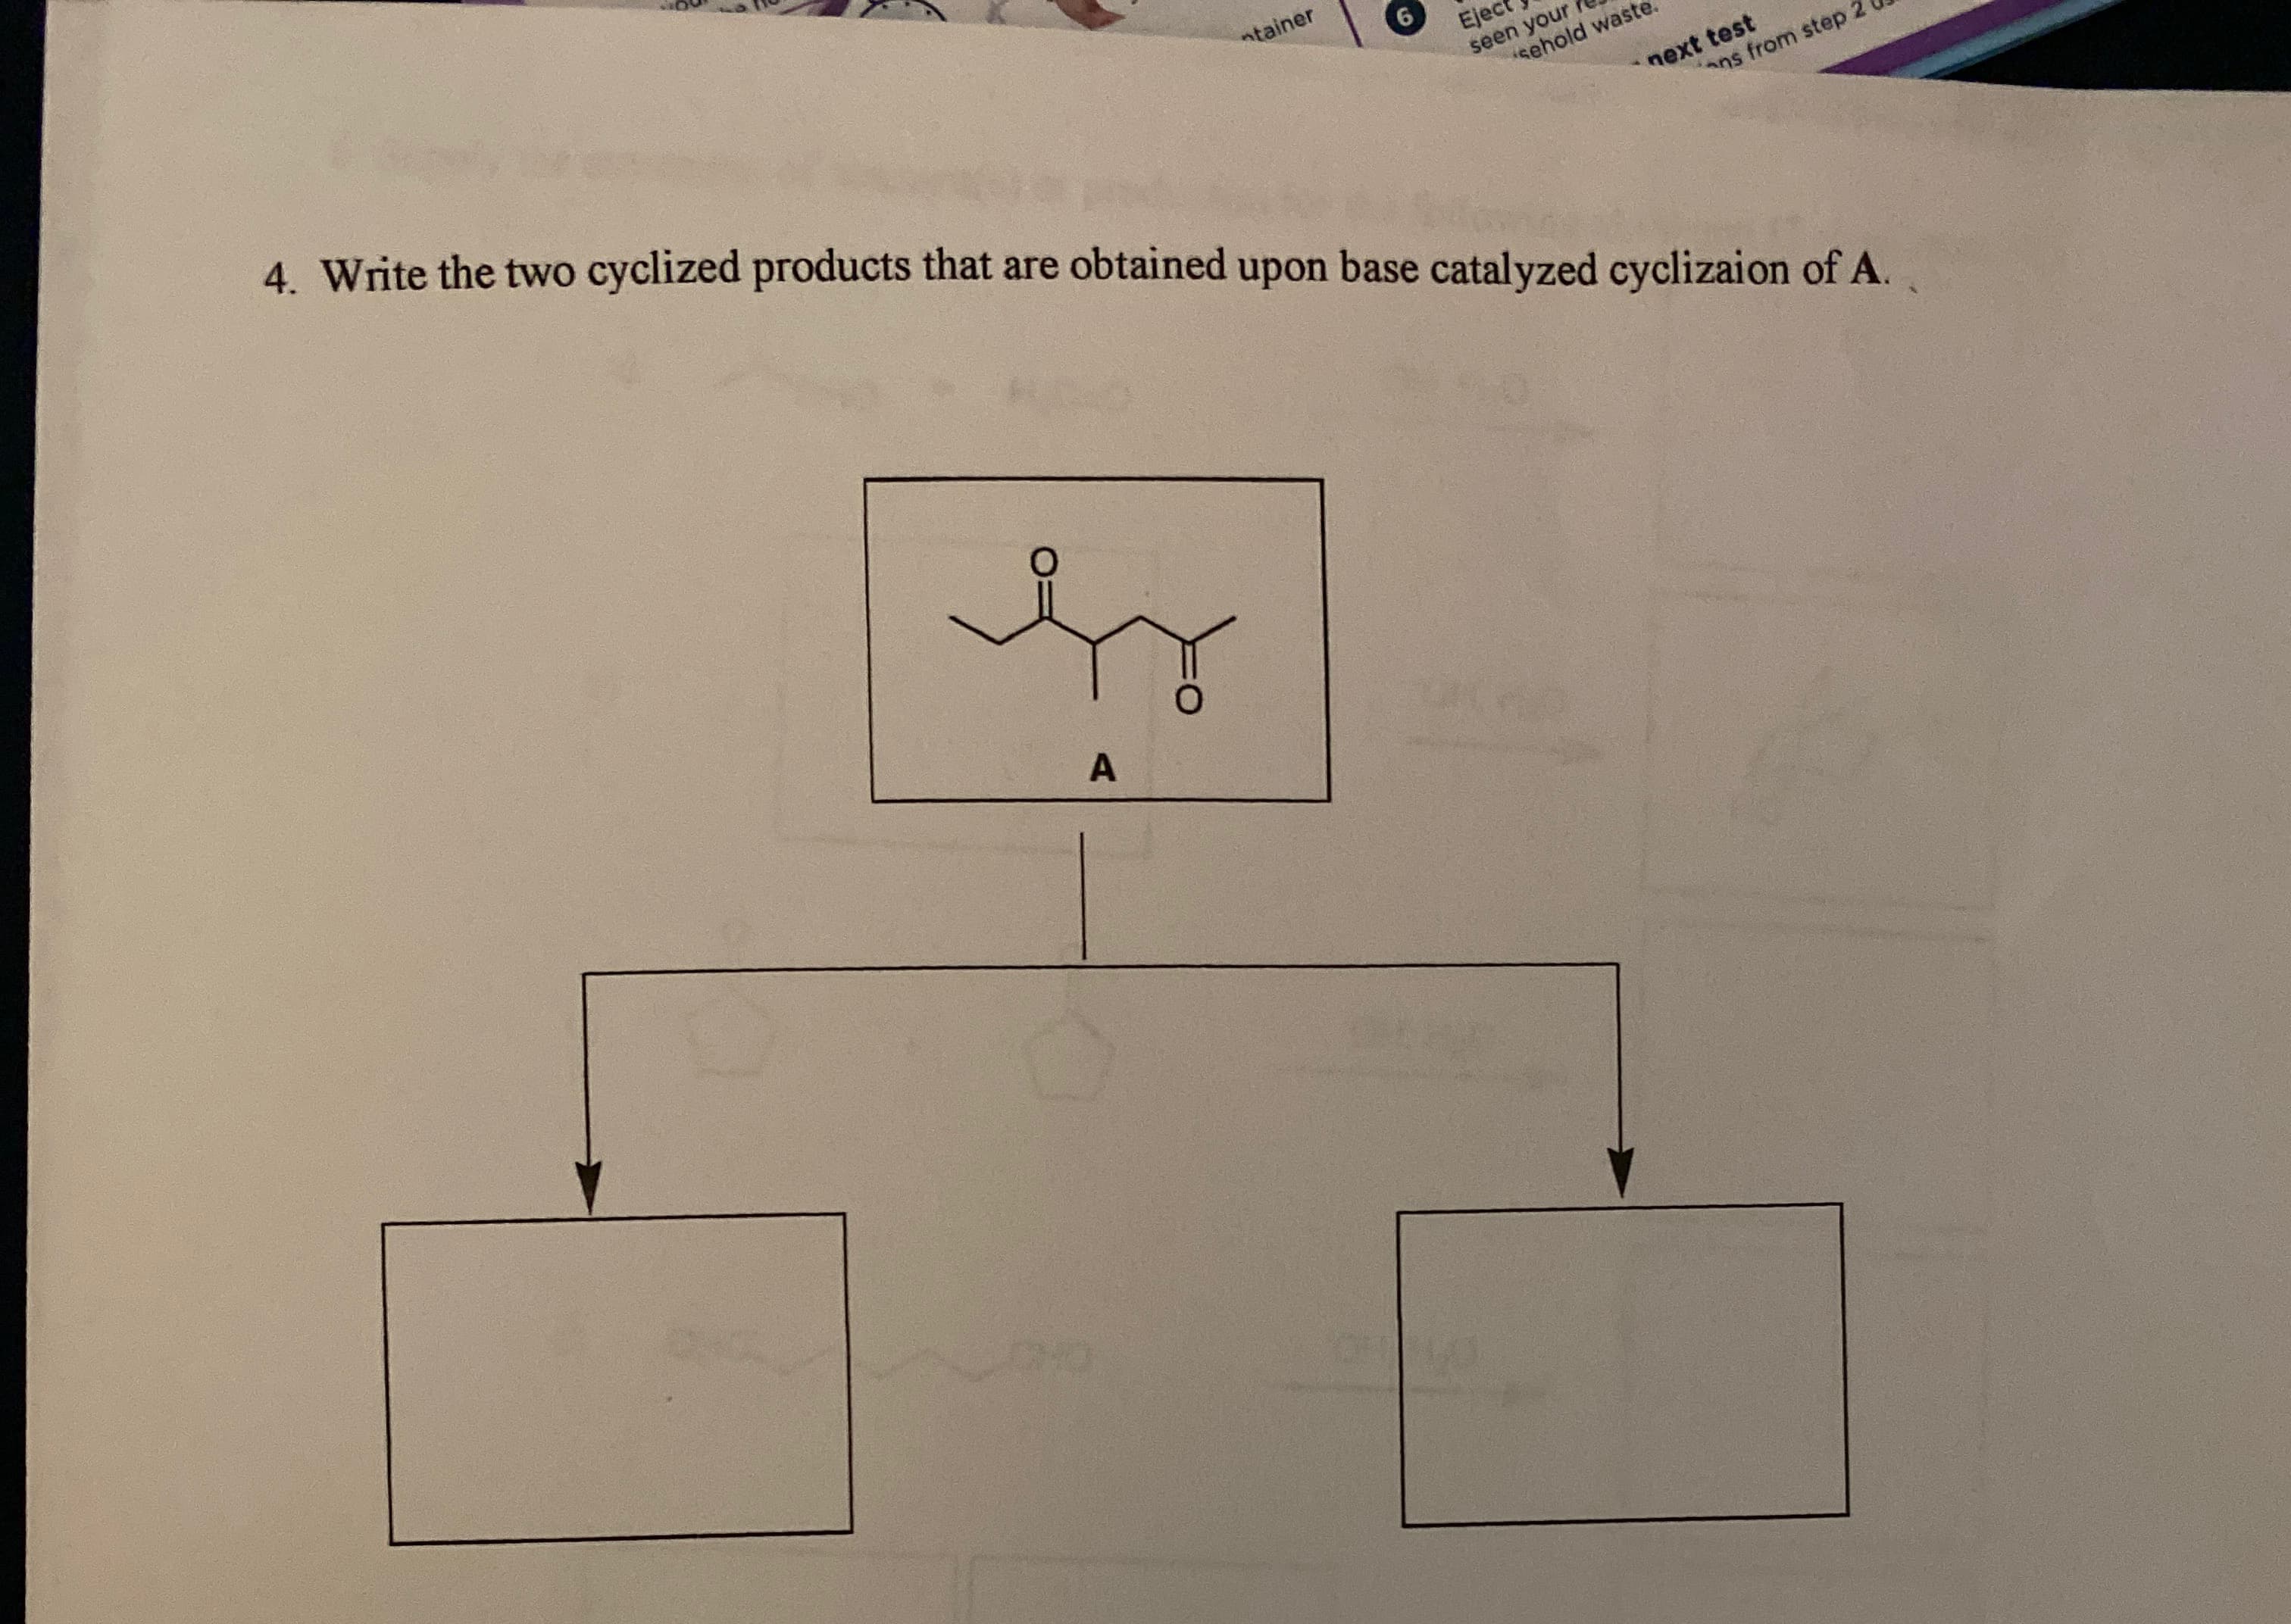 4. Write the two cyclized products that are obtained upon base catalyzed cyclizaion of A.
A
